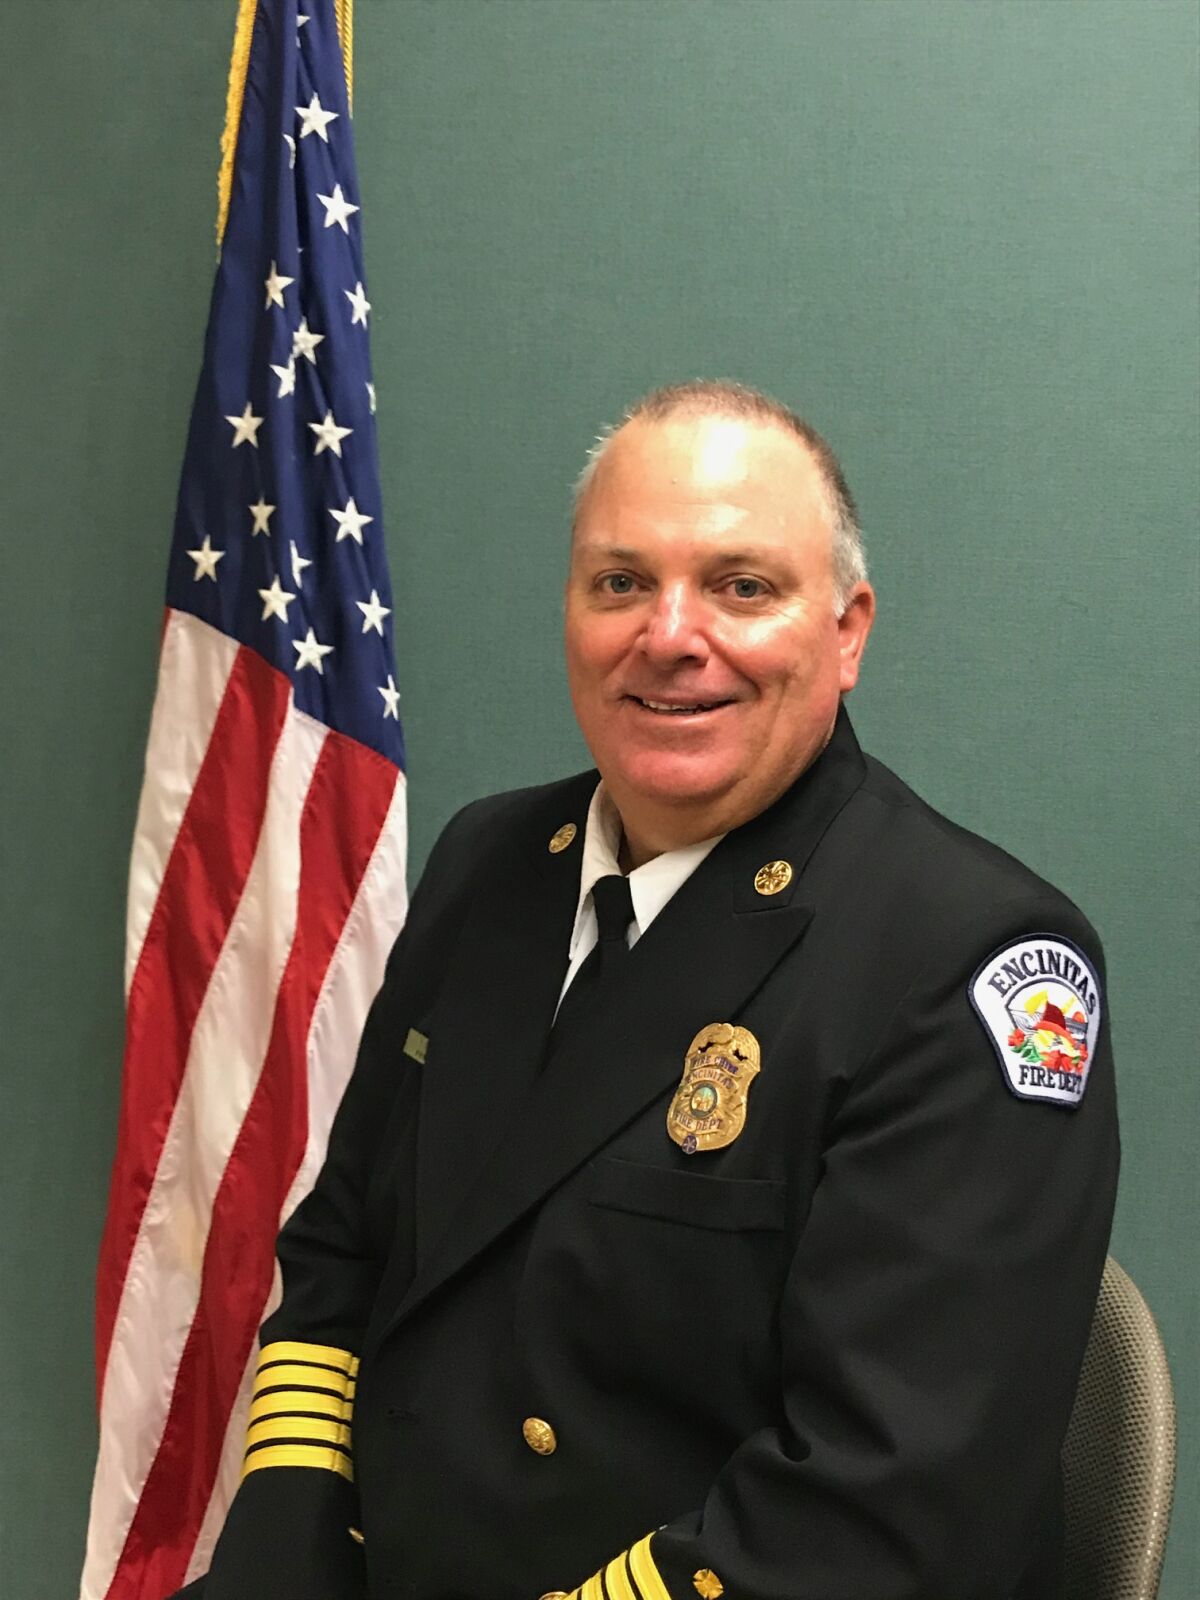 Chief Mike Stein